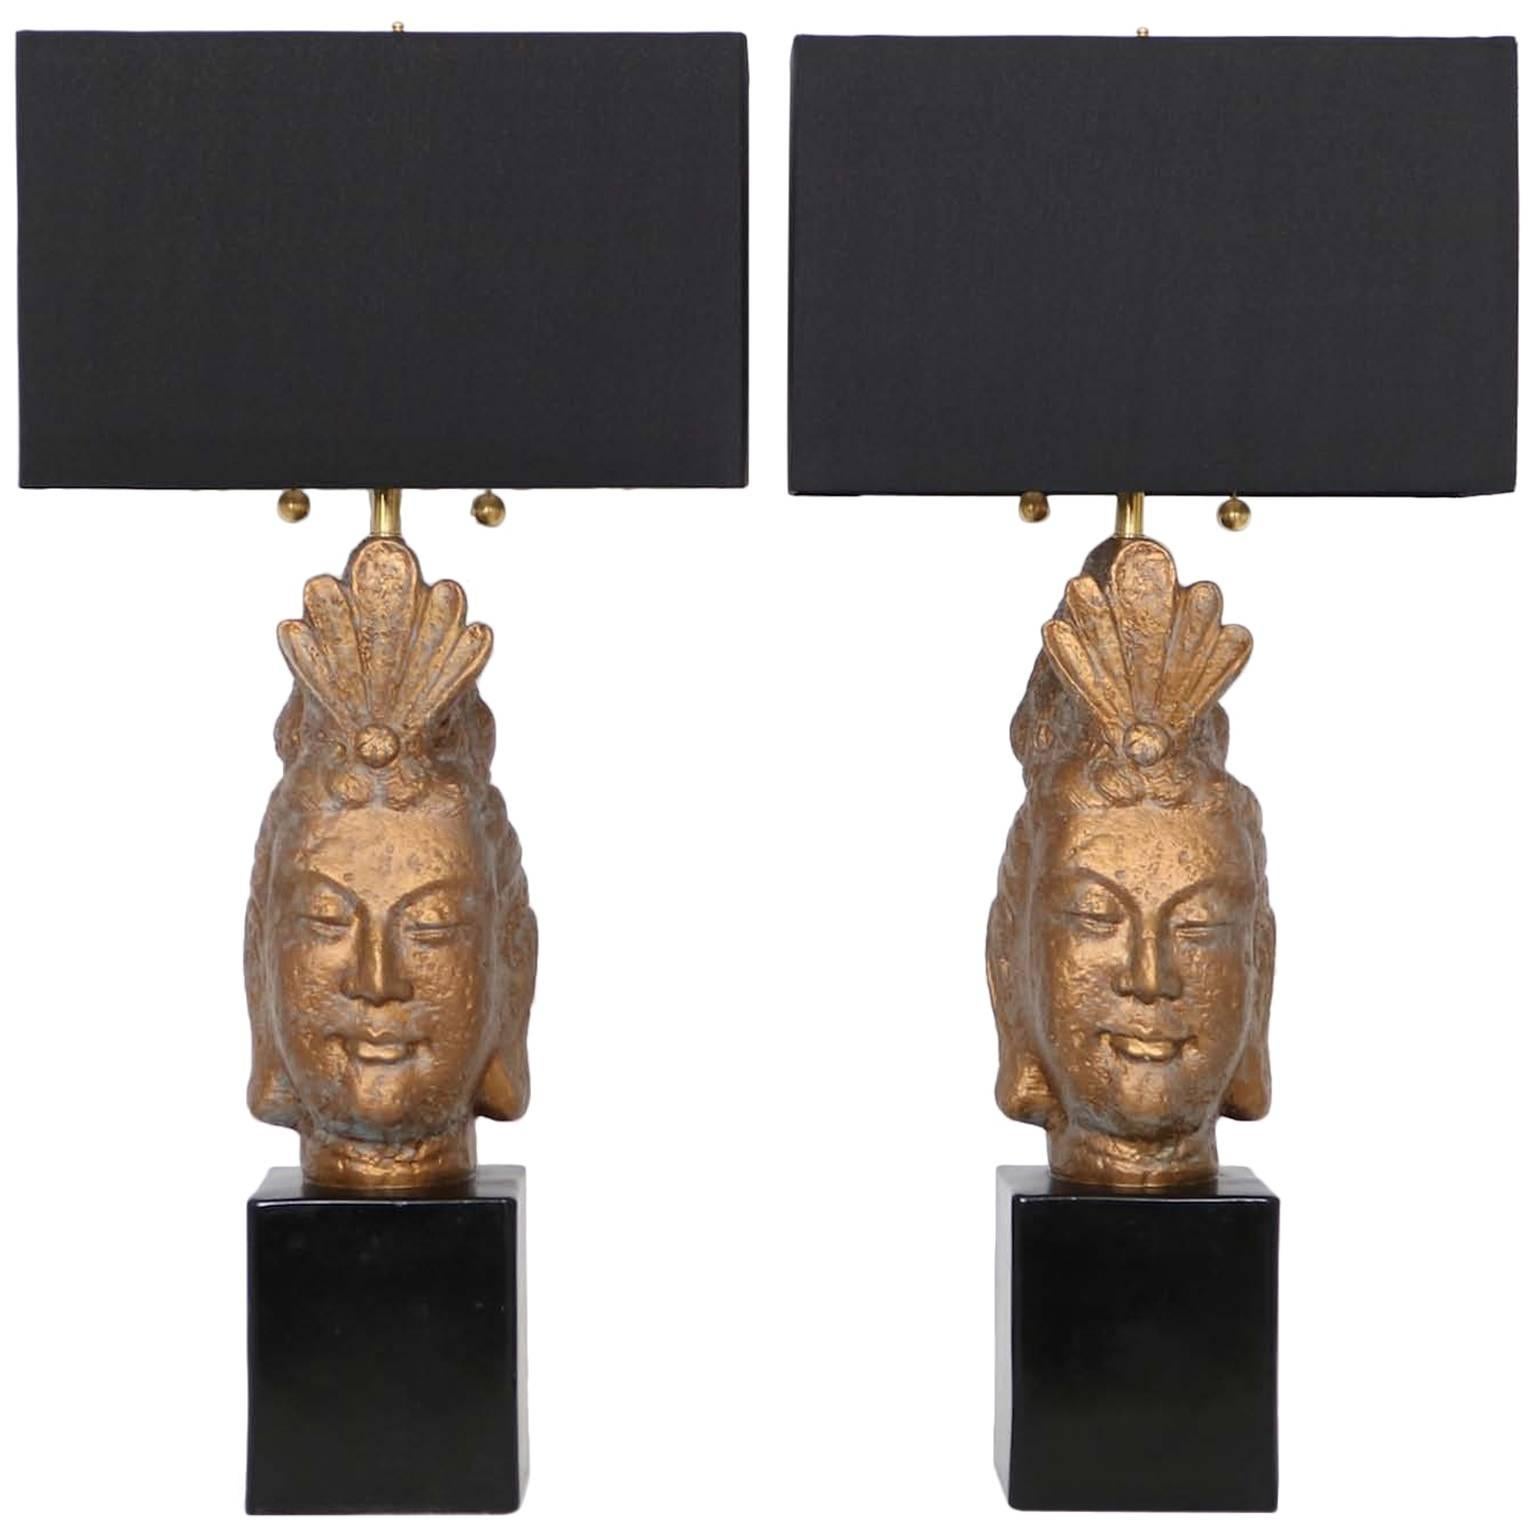 Restored Pair of James Mont Style Buddha lamps by Quartite Creative